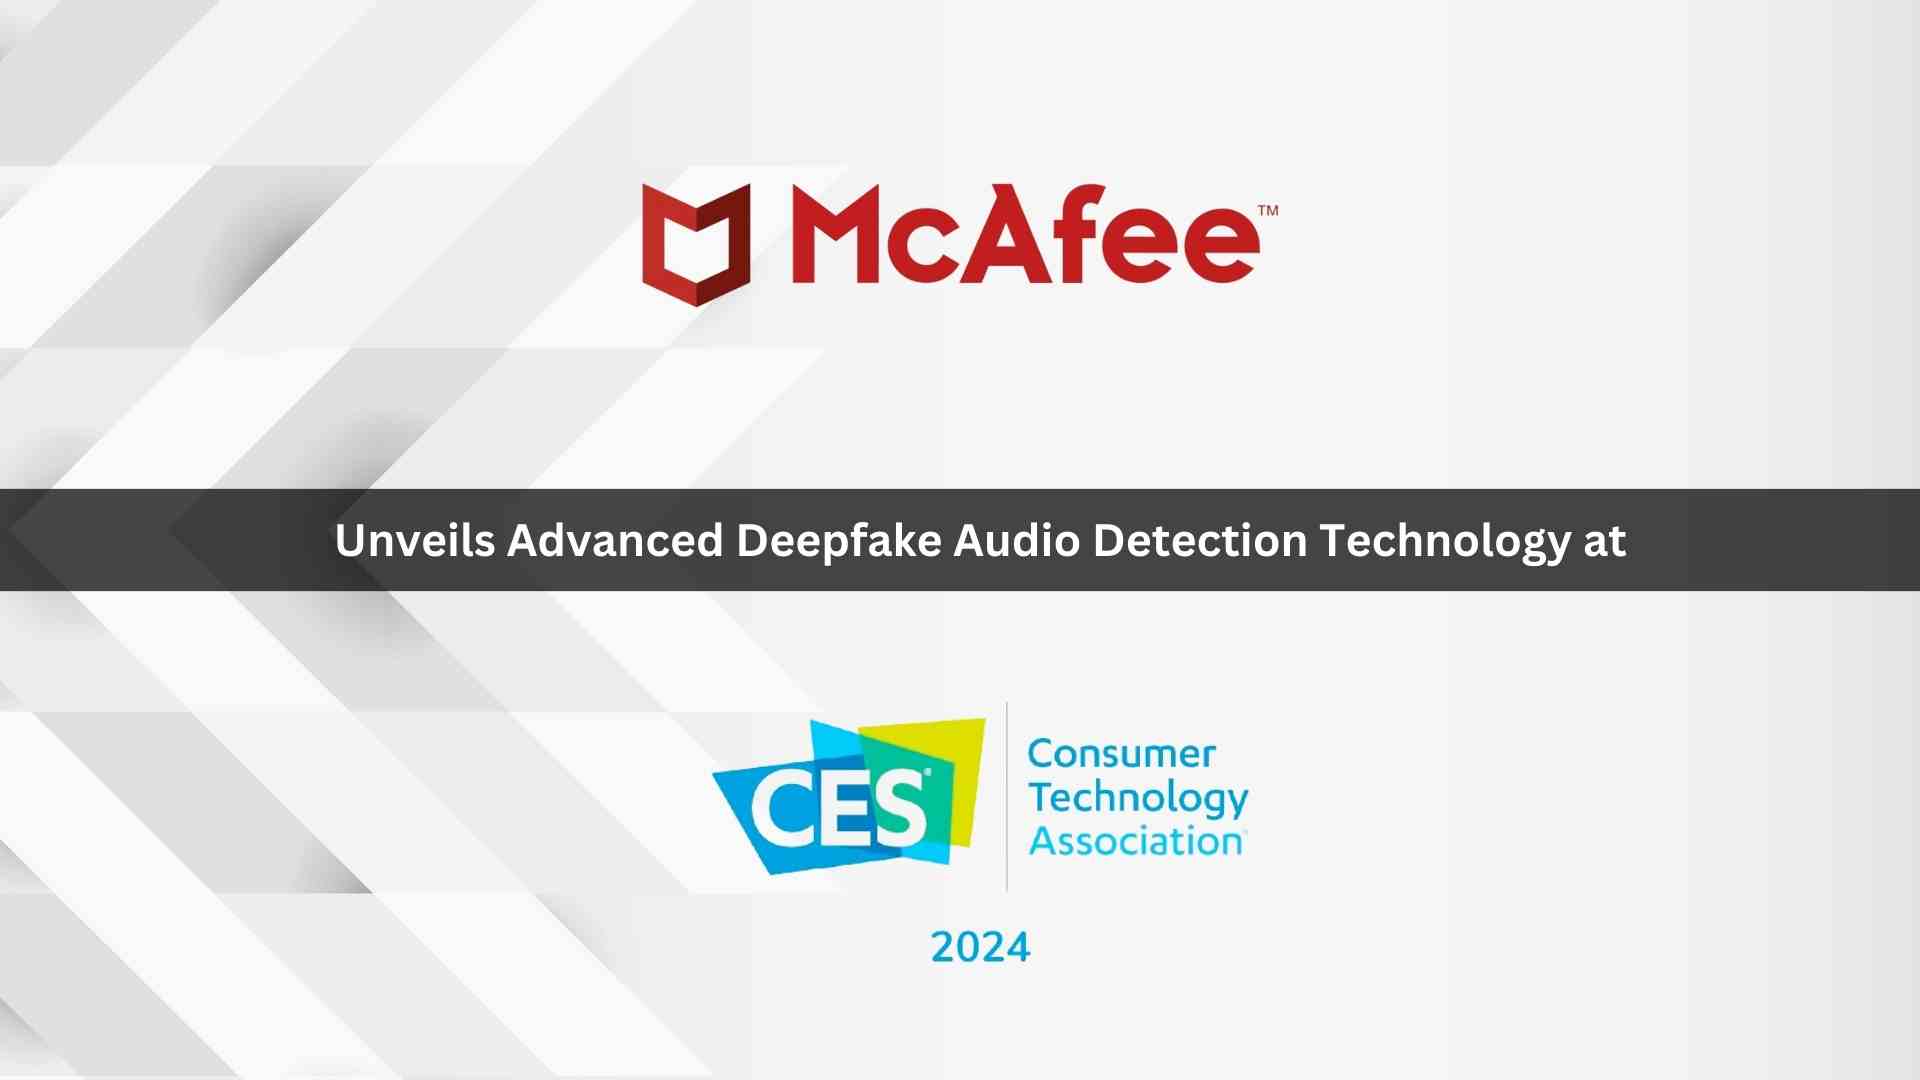 McAfee Unveils Advanced Deepfake Audio Detection Technology at CES 2024 to Defend Against Rise in AI-Generated Scams and Disinformation